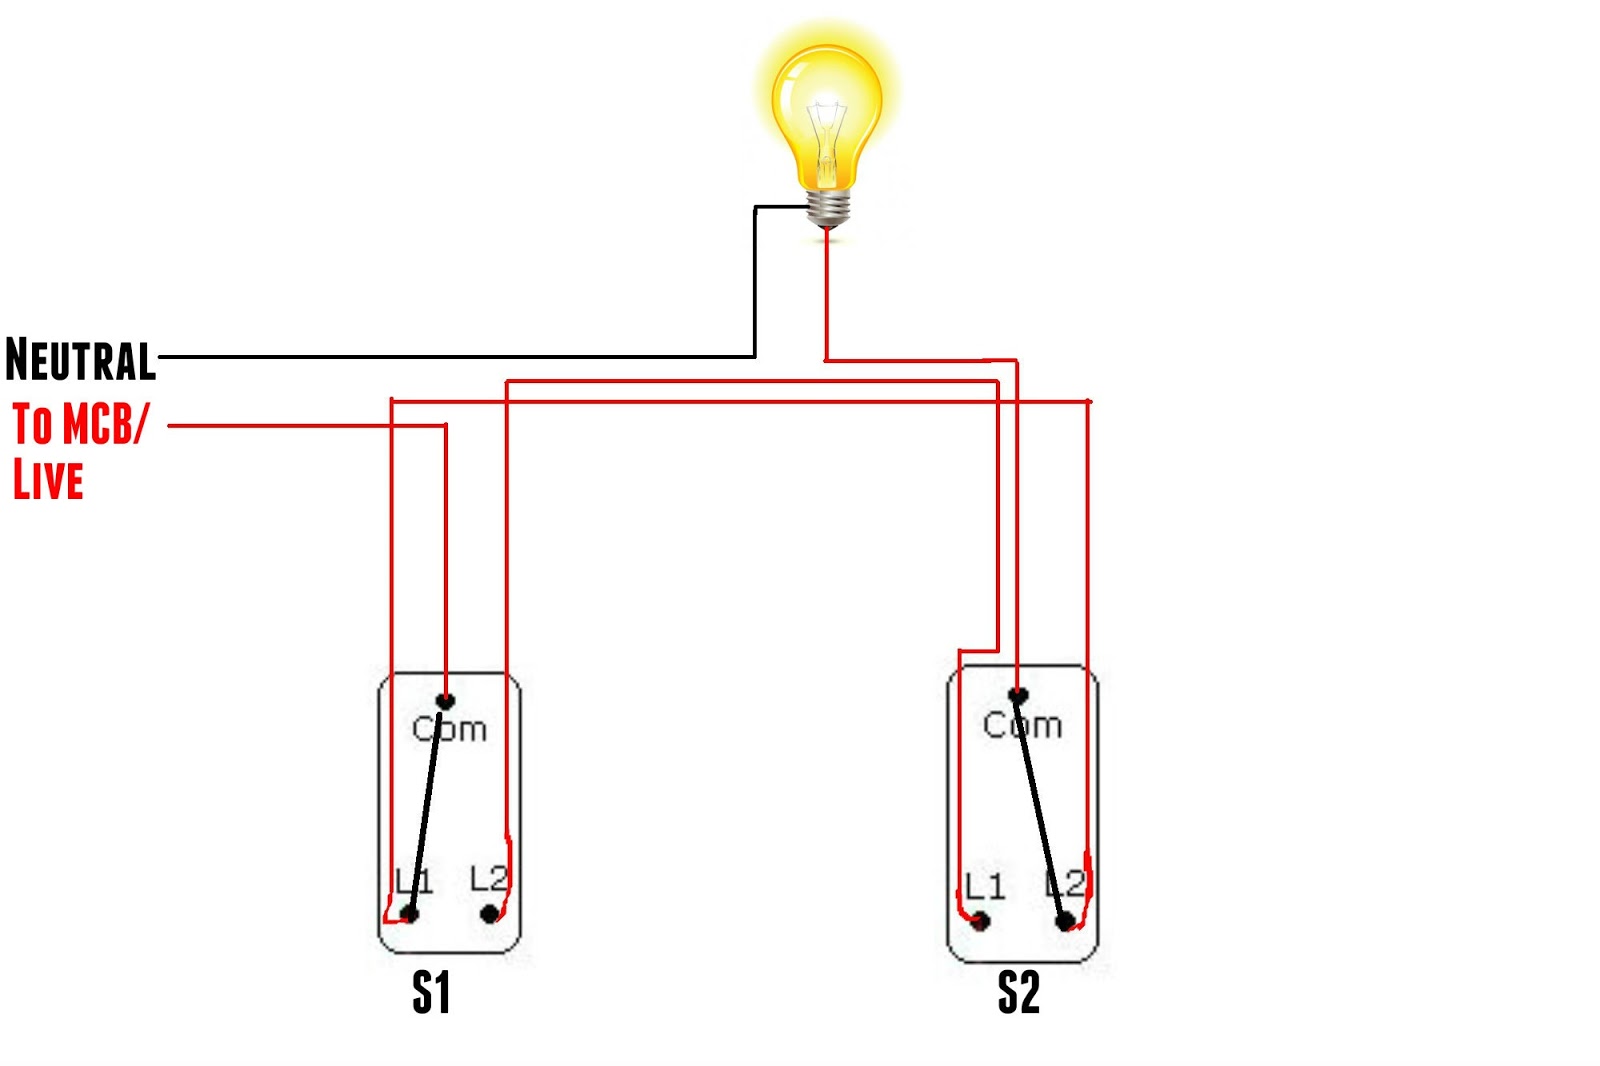 The World Through Electricity: Two way switch